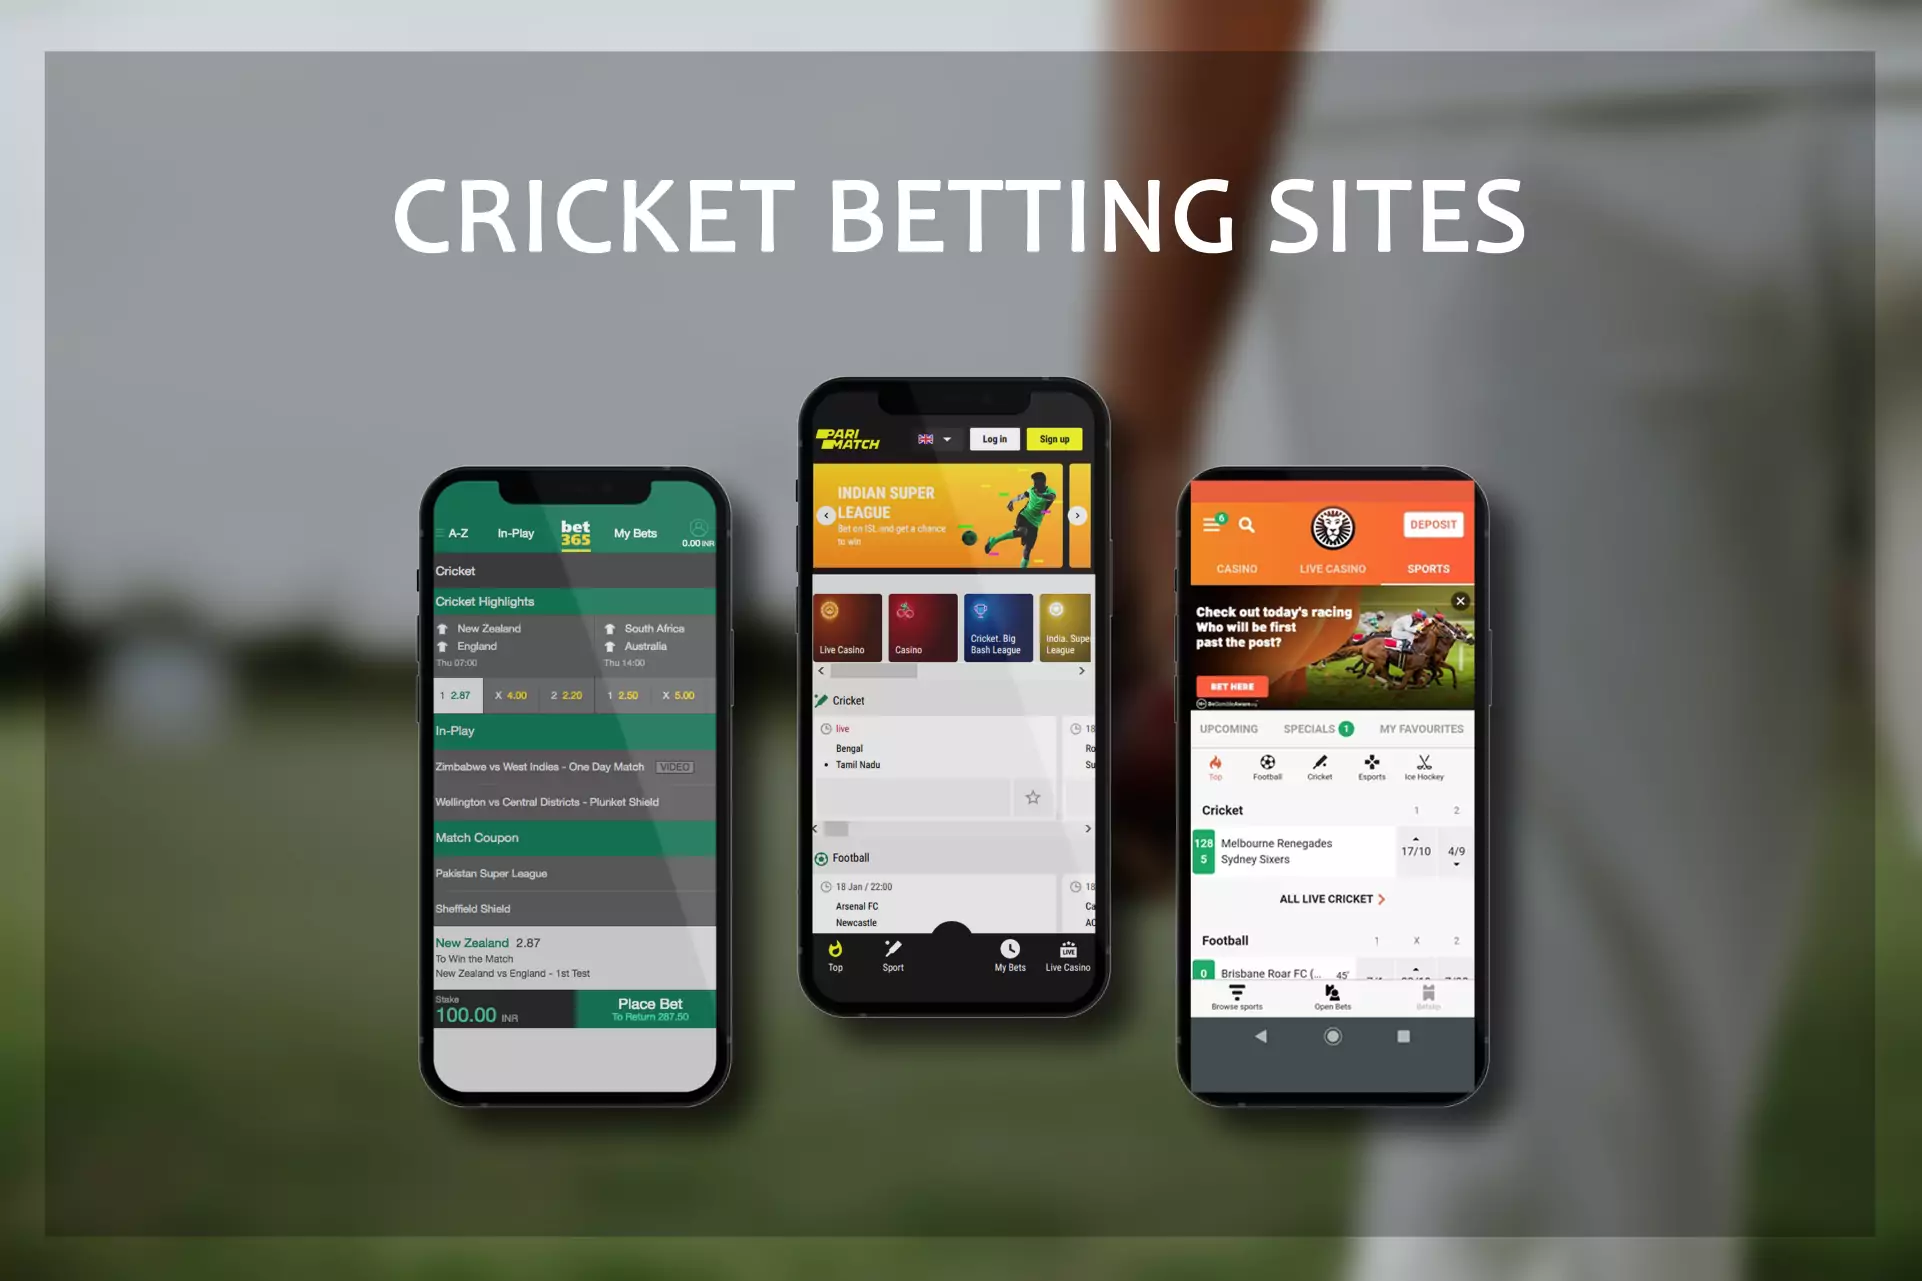 Choose the best site to bet on cricket in India.